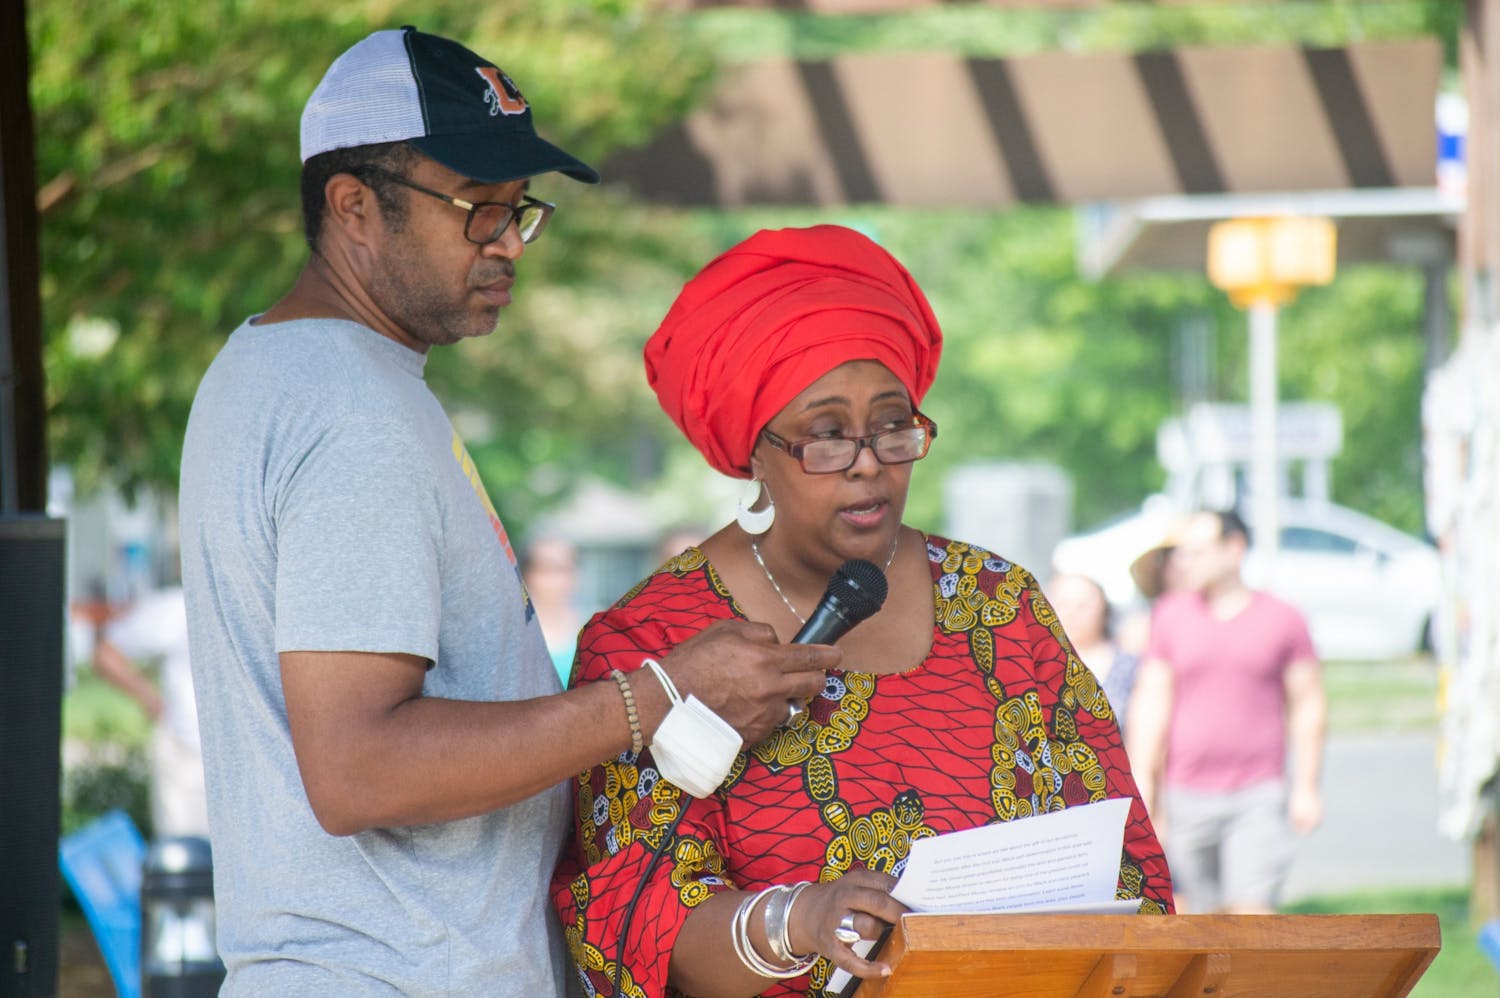 Community members attend inaugural Chapel Hill-Carrboro Juneteenth events